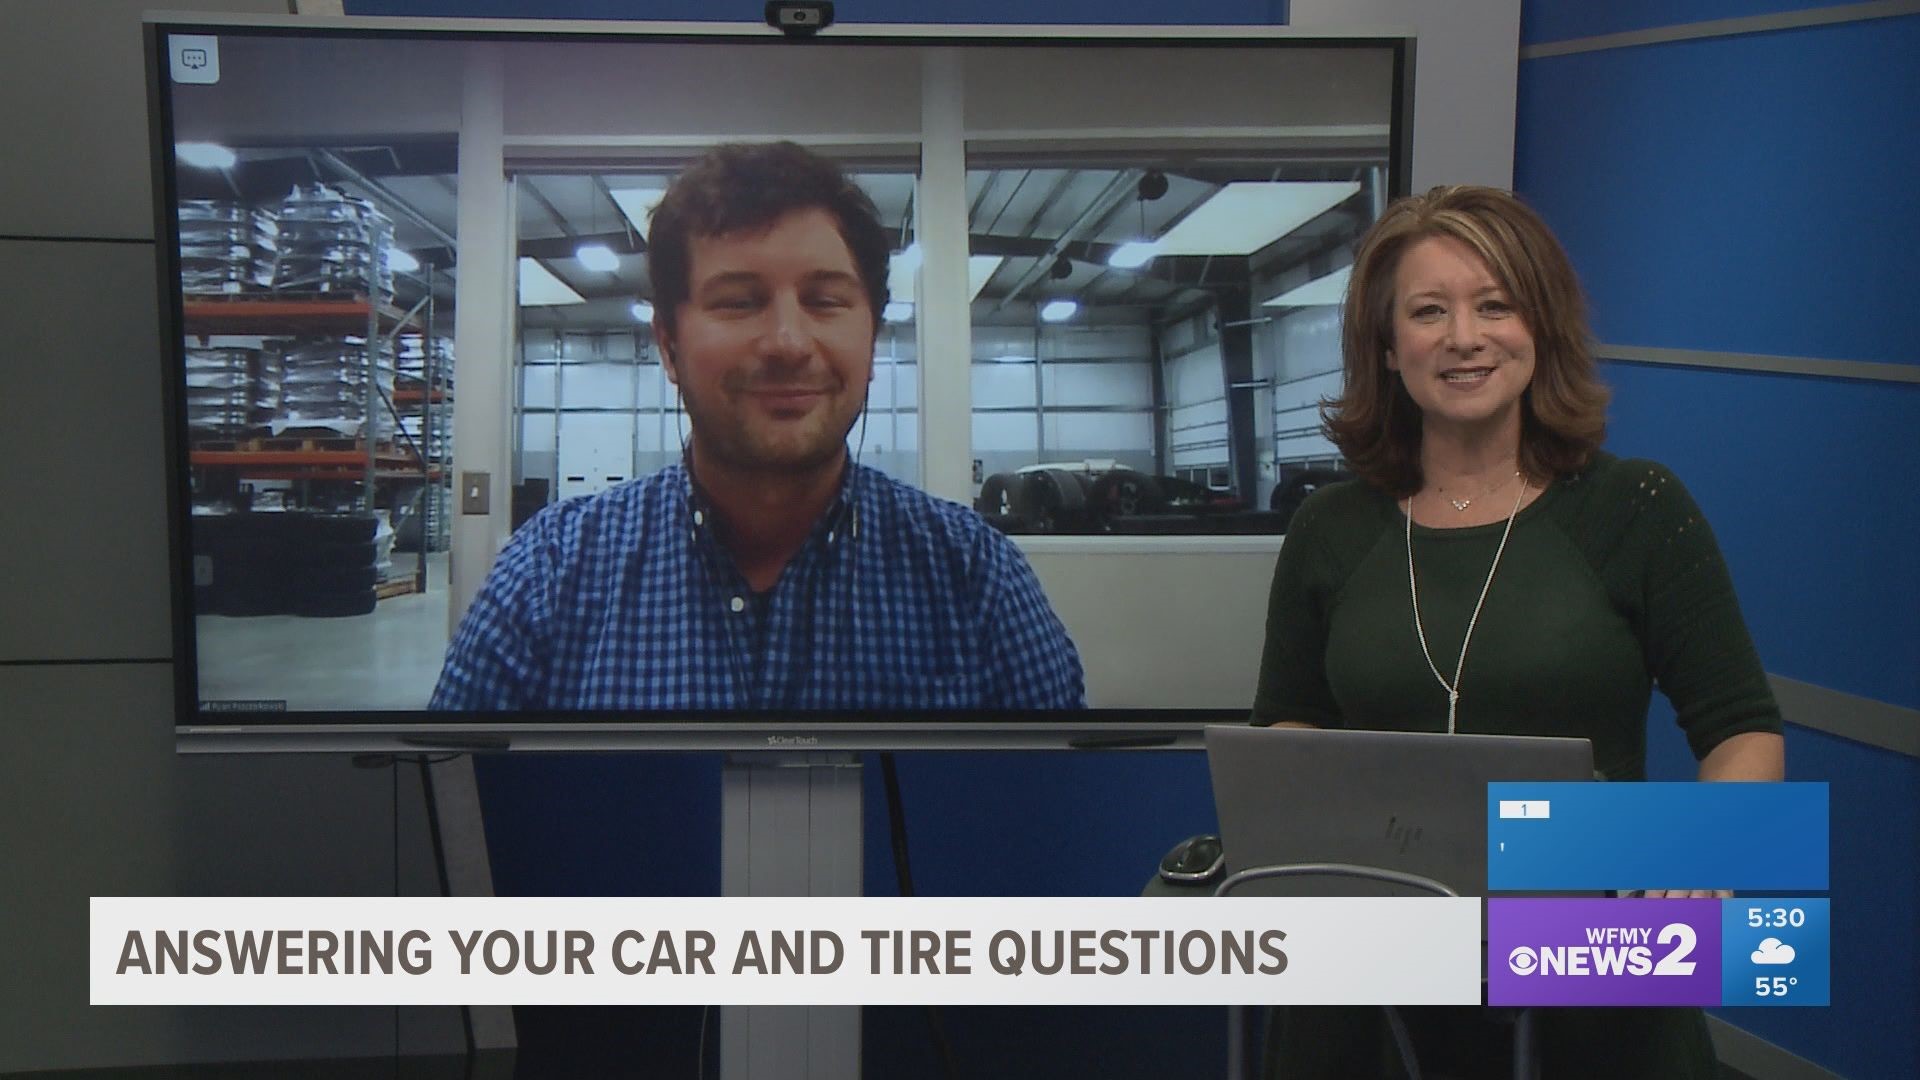 Ryan Pszczolkowski from Consumer Reports joined us to answer your questions and share these tips.